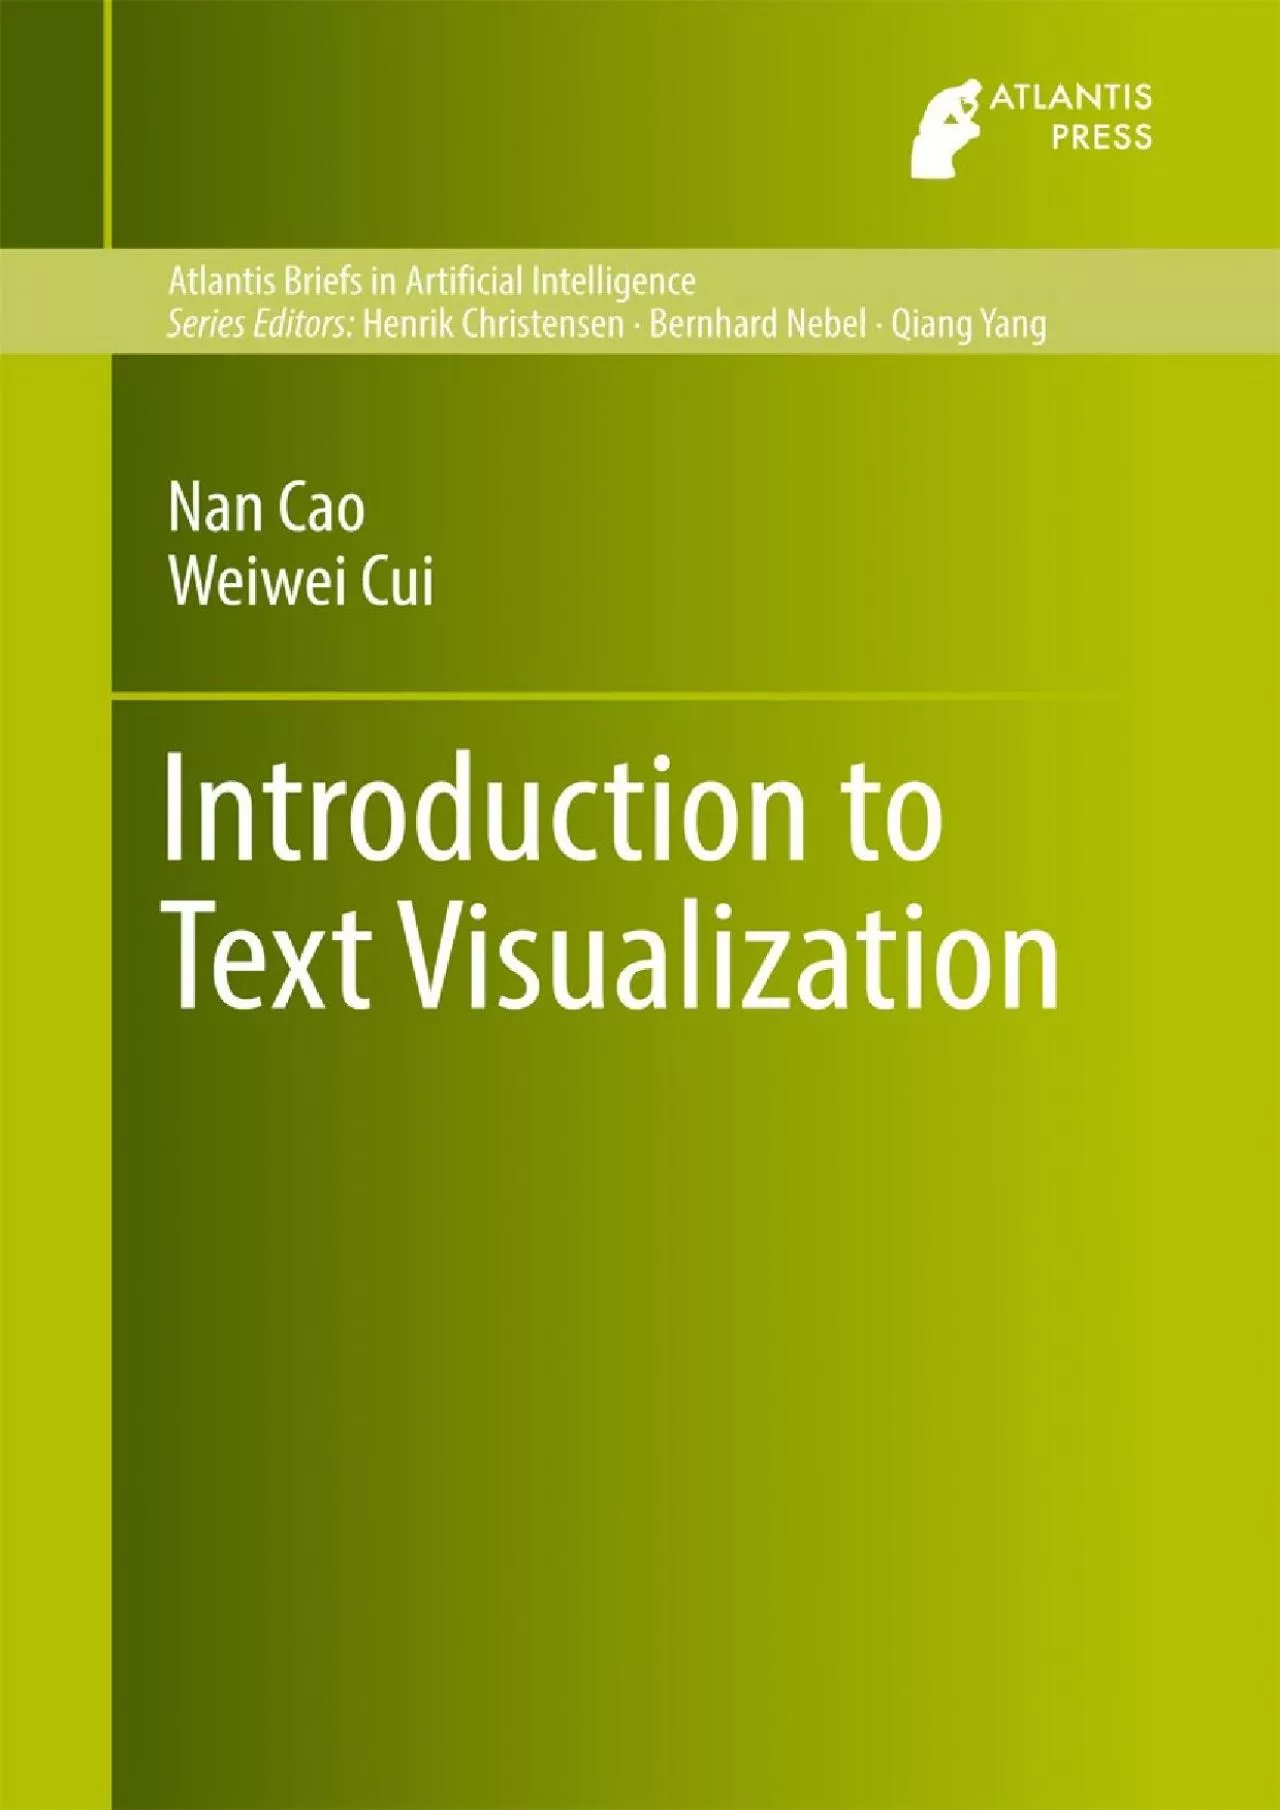 (BOOK)-Introduction to Text Visualization (Atlantis Briefs in Artificial Intelligence